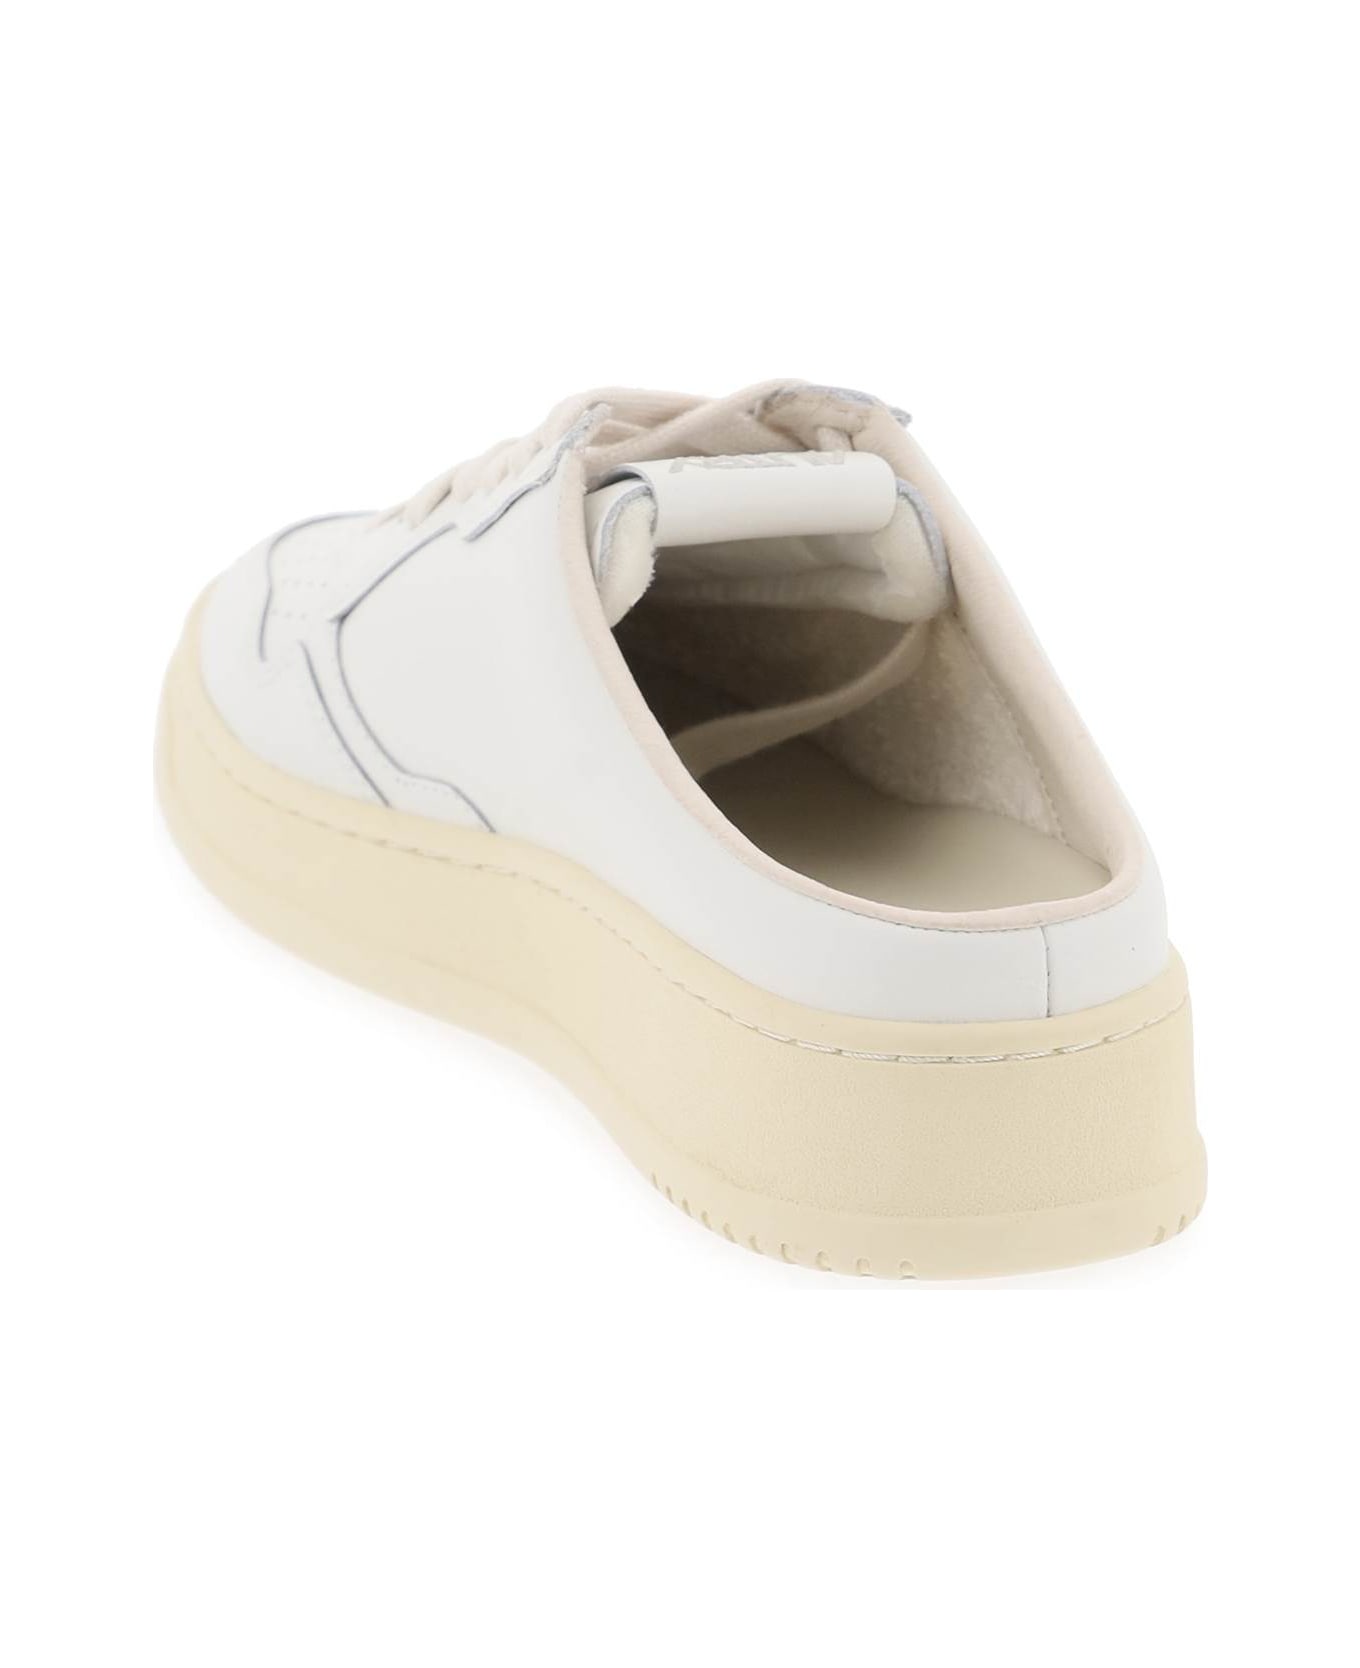 Autry Medalist Mule Low Sneakers - WHITE (White)